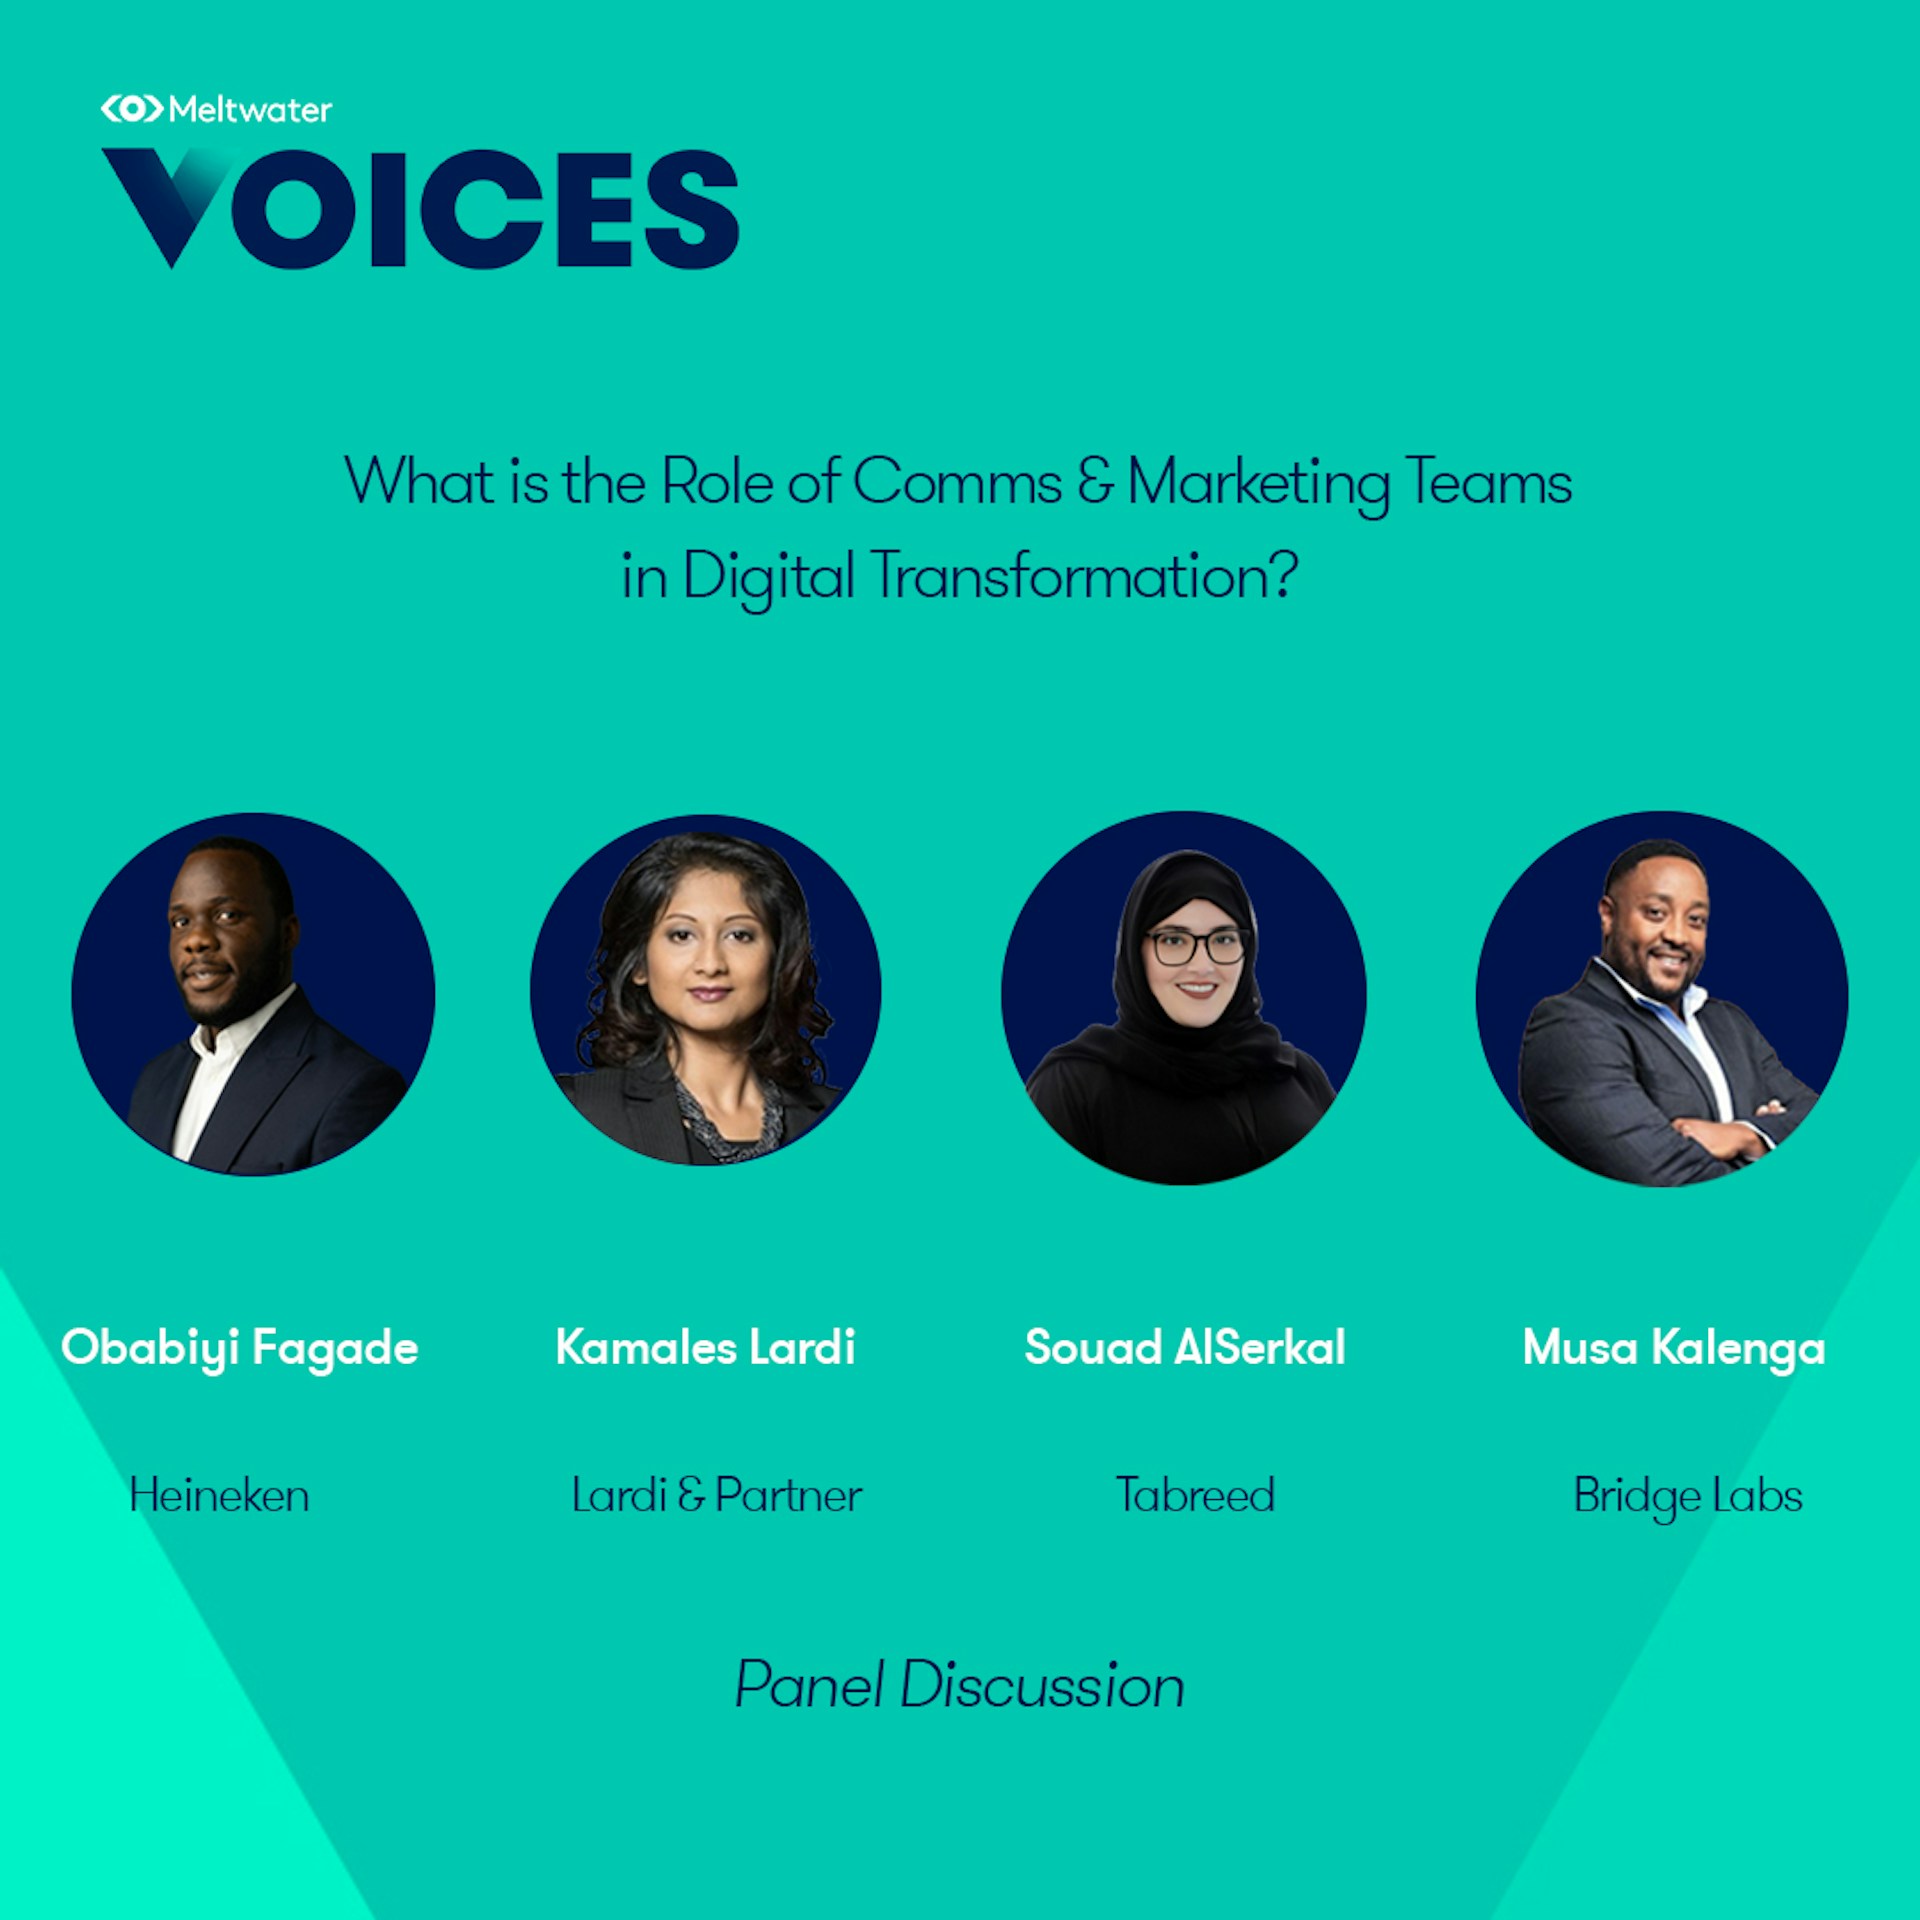 Meltwater Voices - Digital Transformation in Communications and Marketing